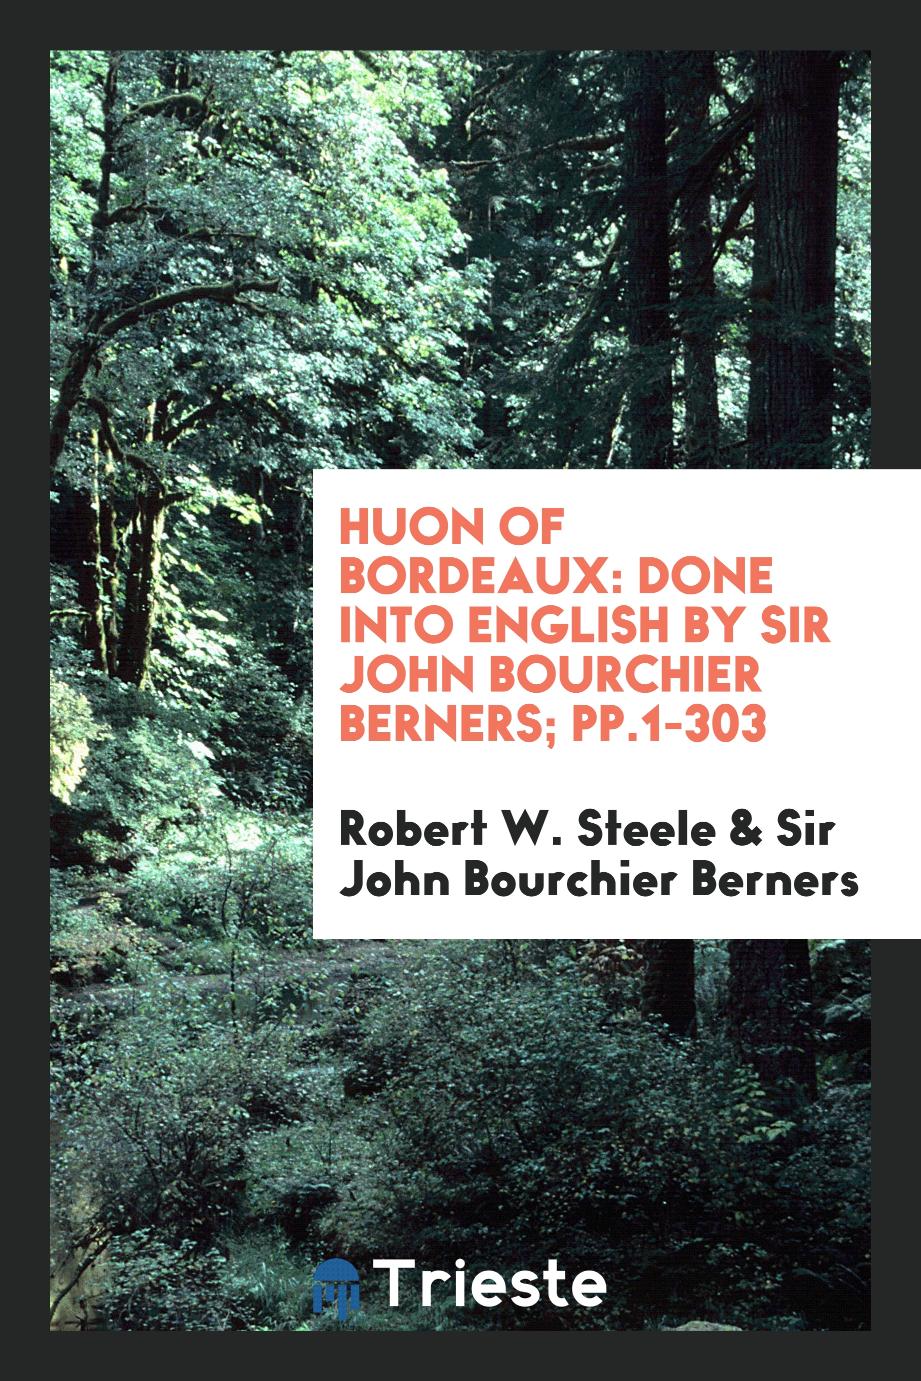 Huon of Bordeaux: Done into English by Sir John Bourchier Berners; pp.1-303